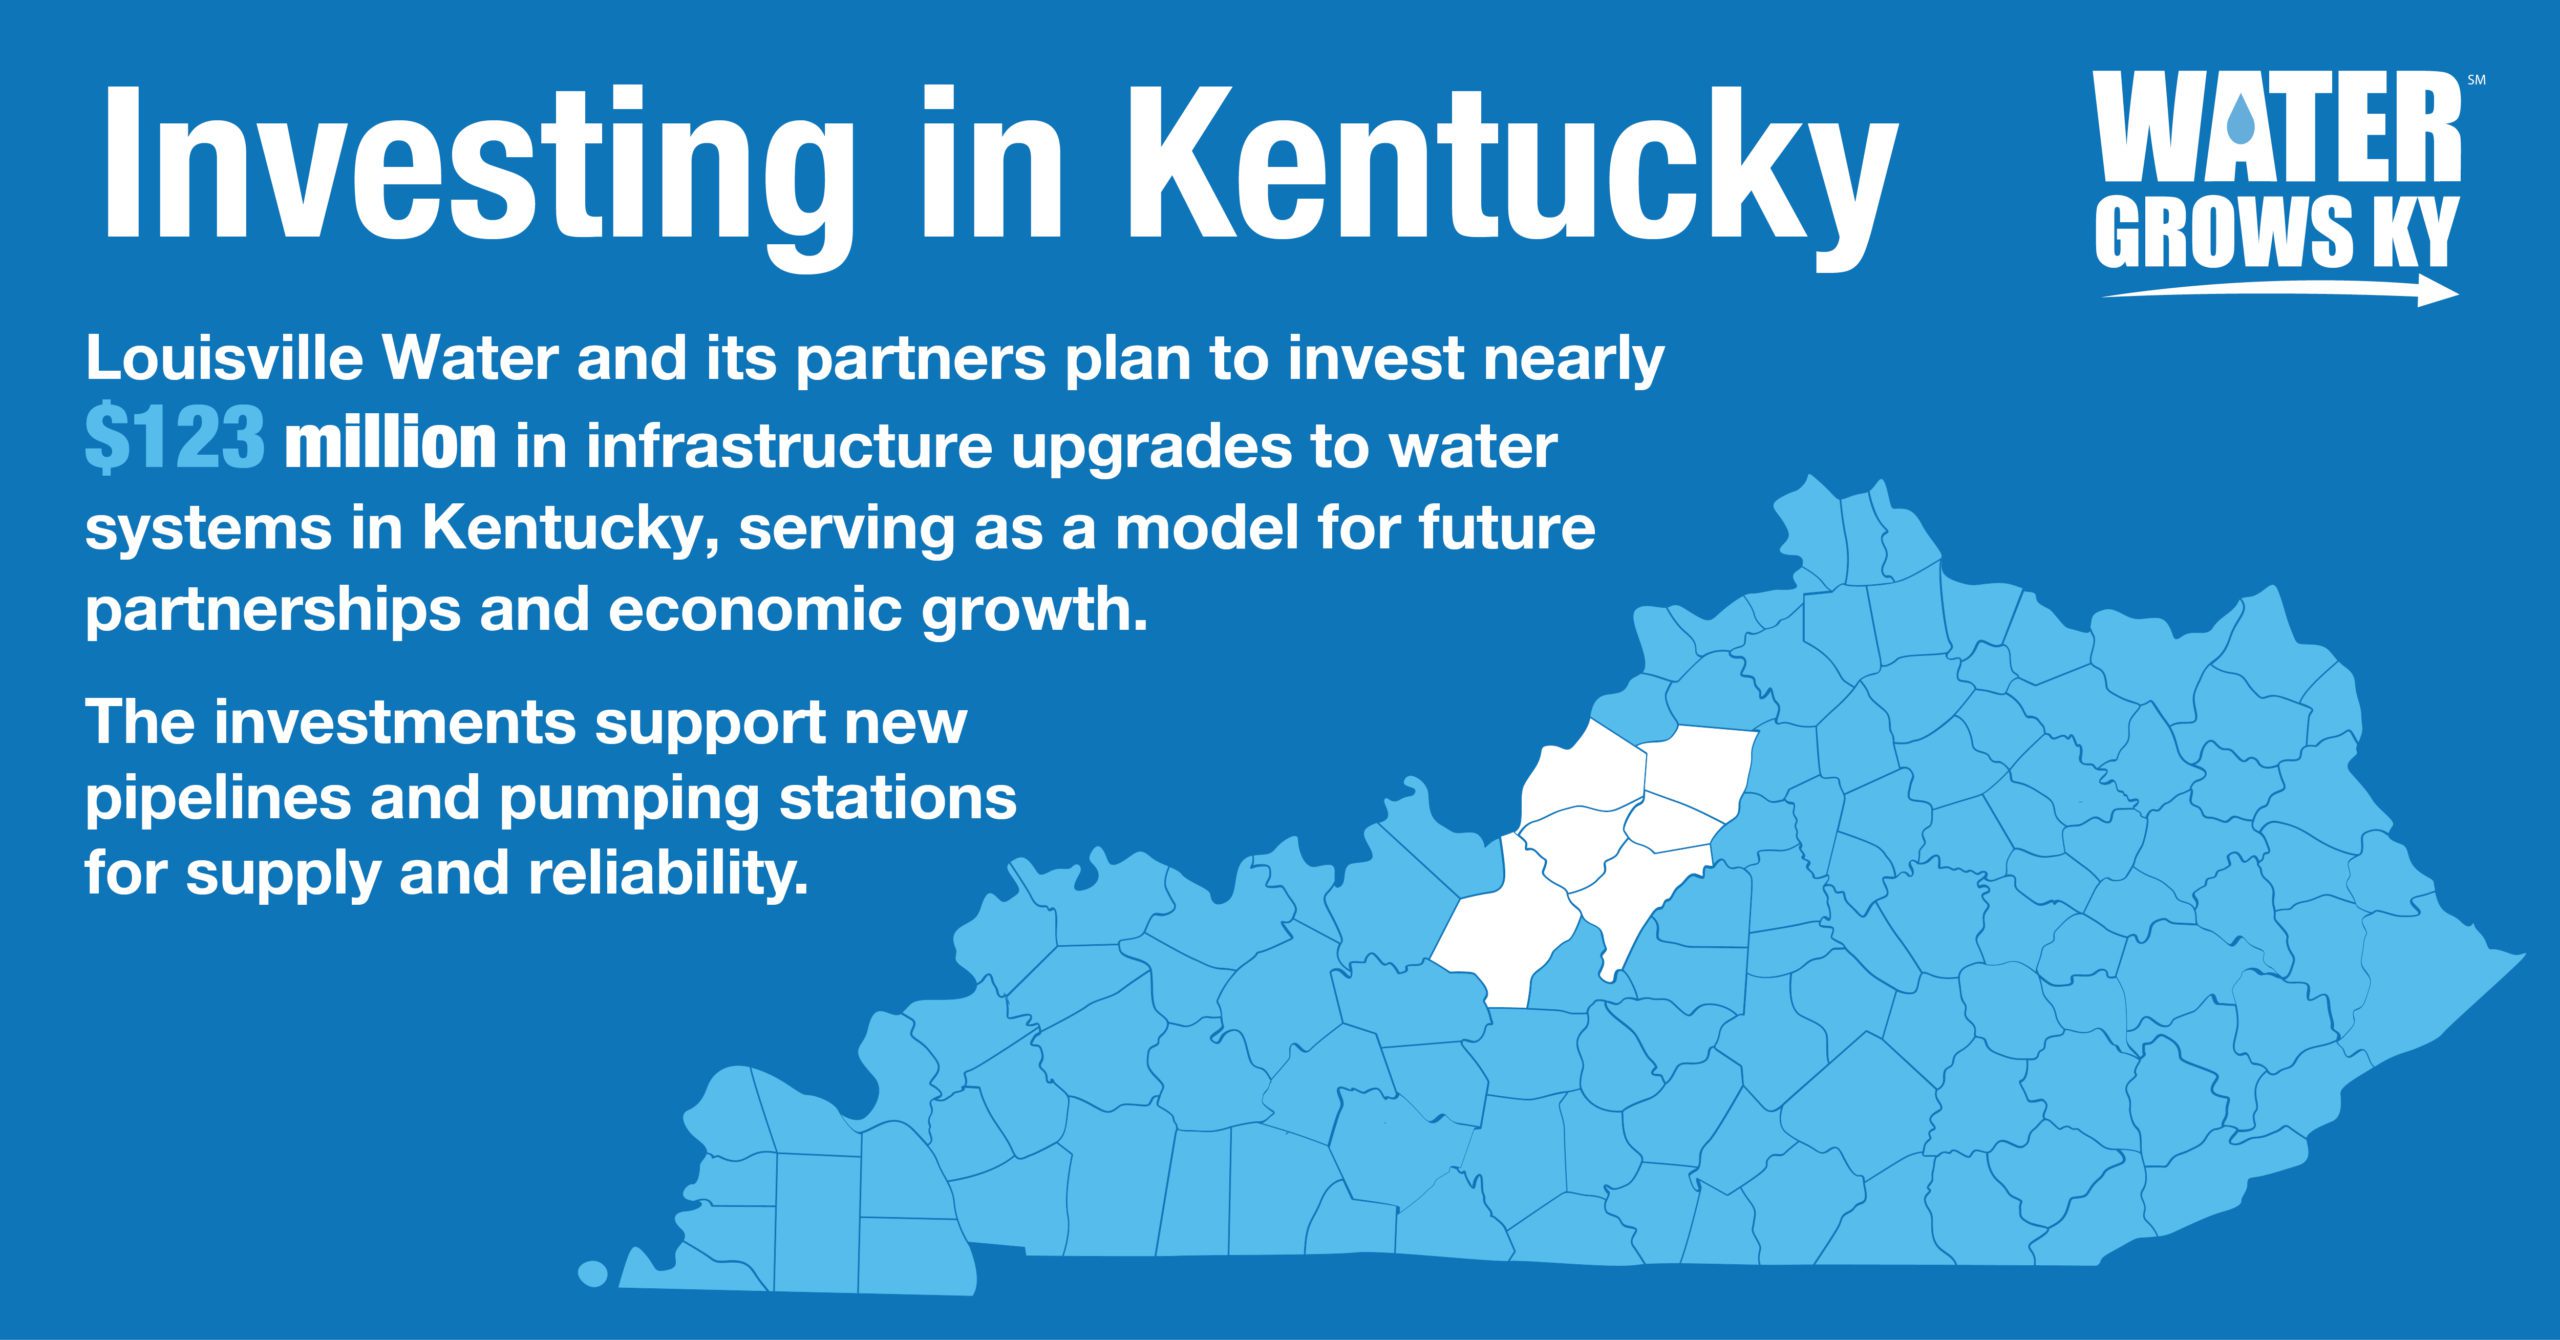 Louisville Water plans to invest $123 million in infrastructure upgrades to water in Kentucky.